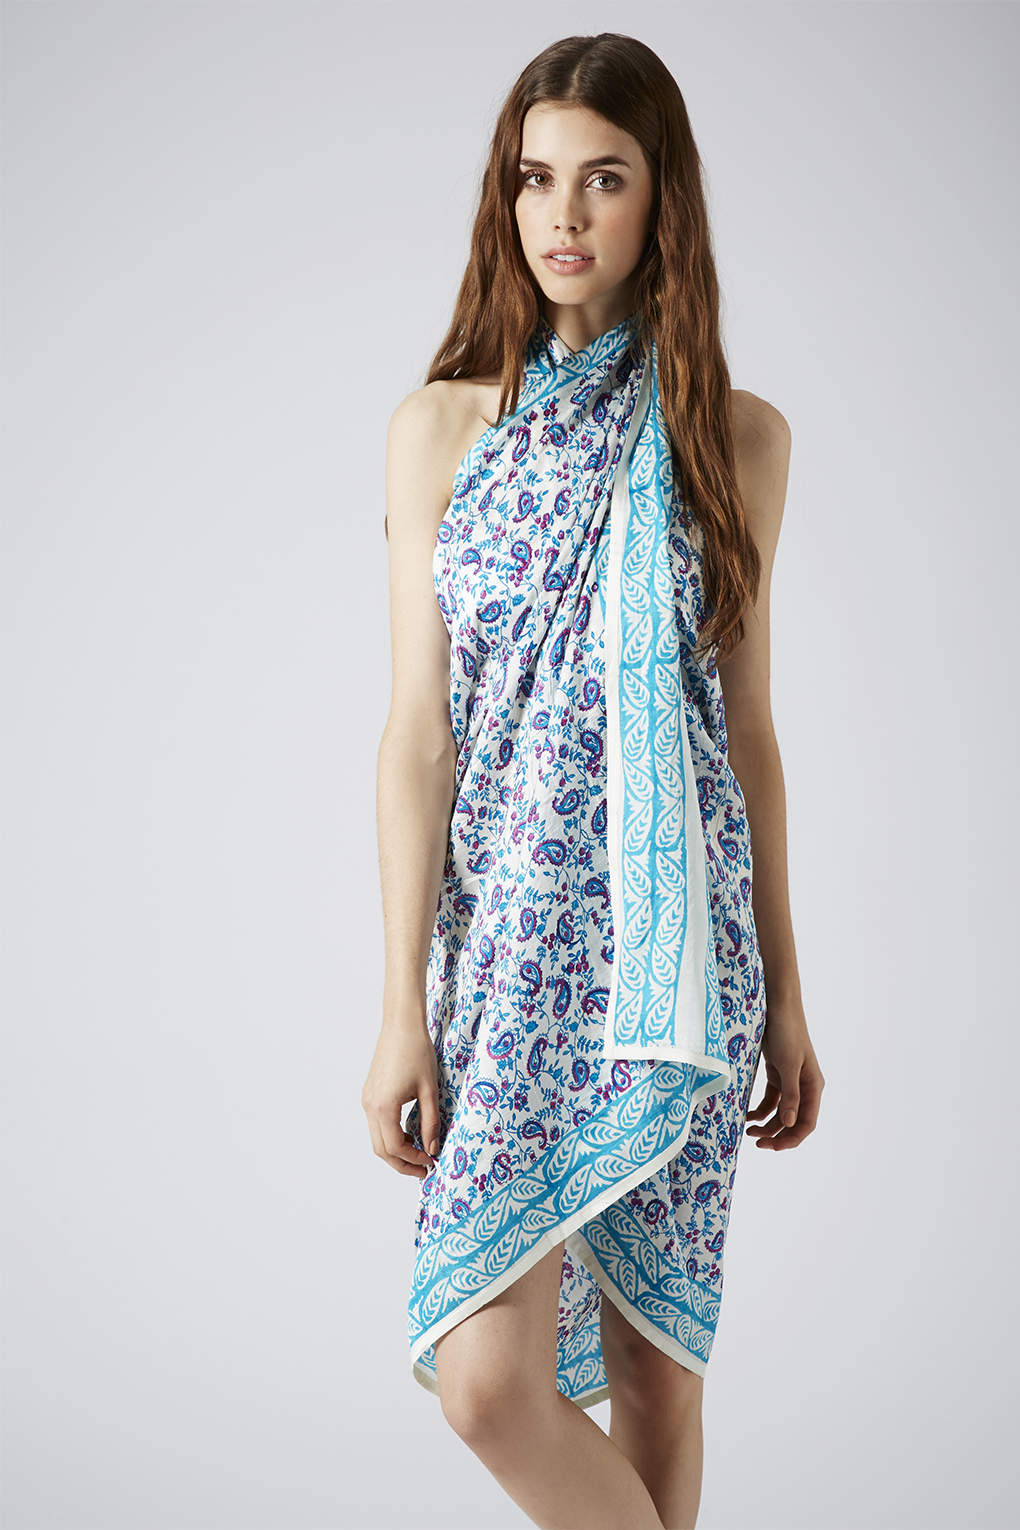 TOPSHOP Key To Freedom Silk Sarong in Turquoise (Blue) - Lyst